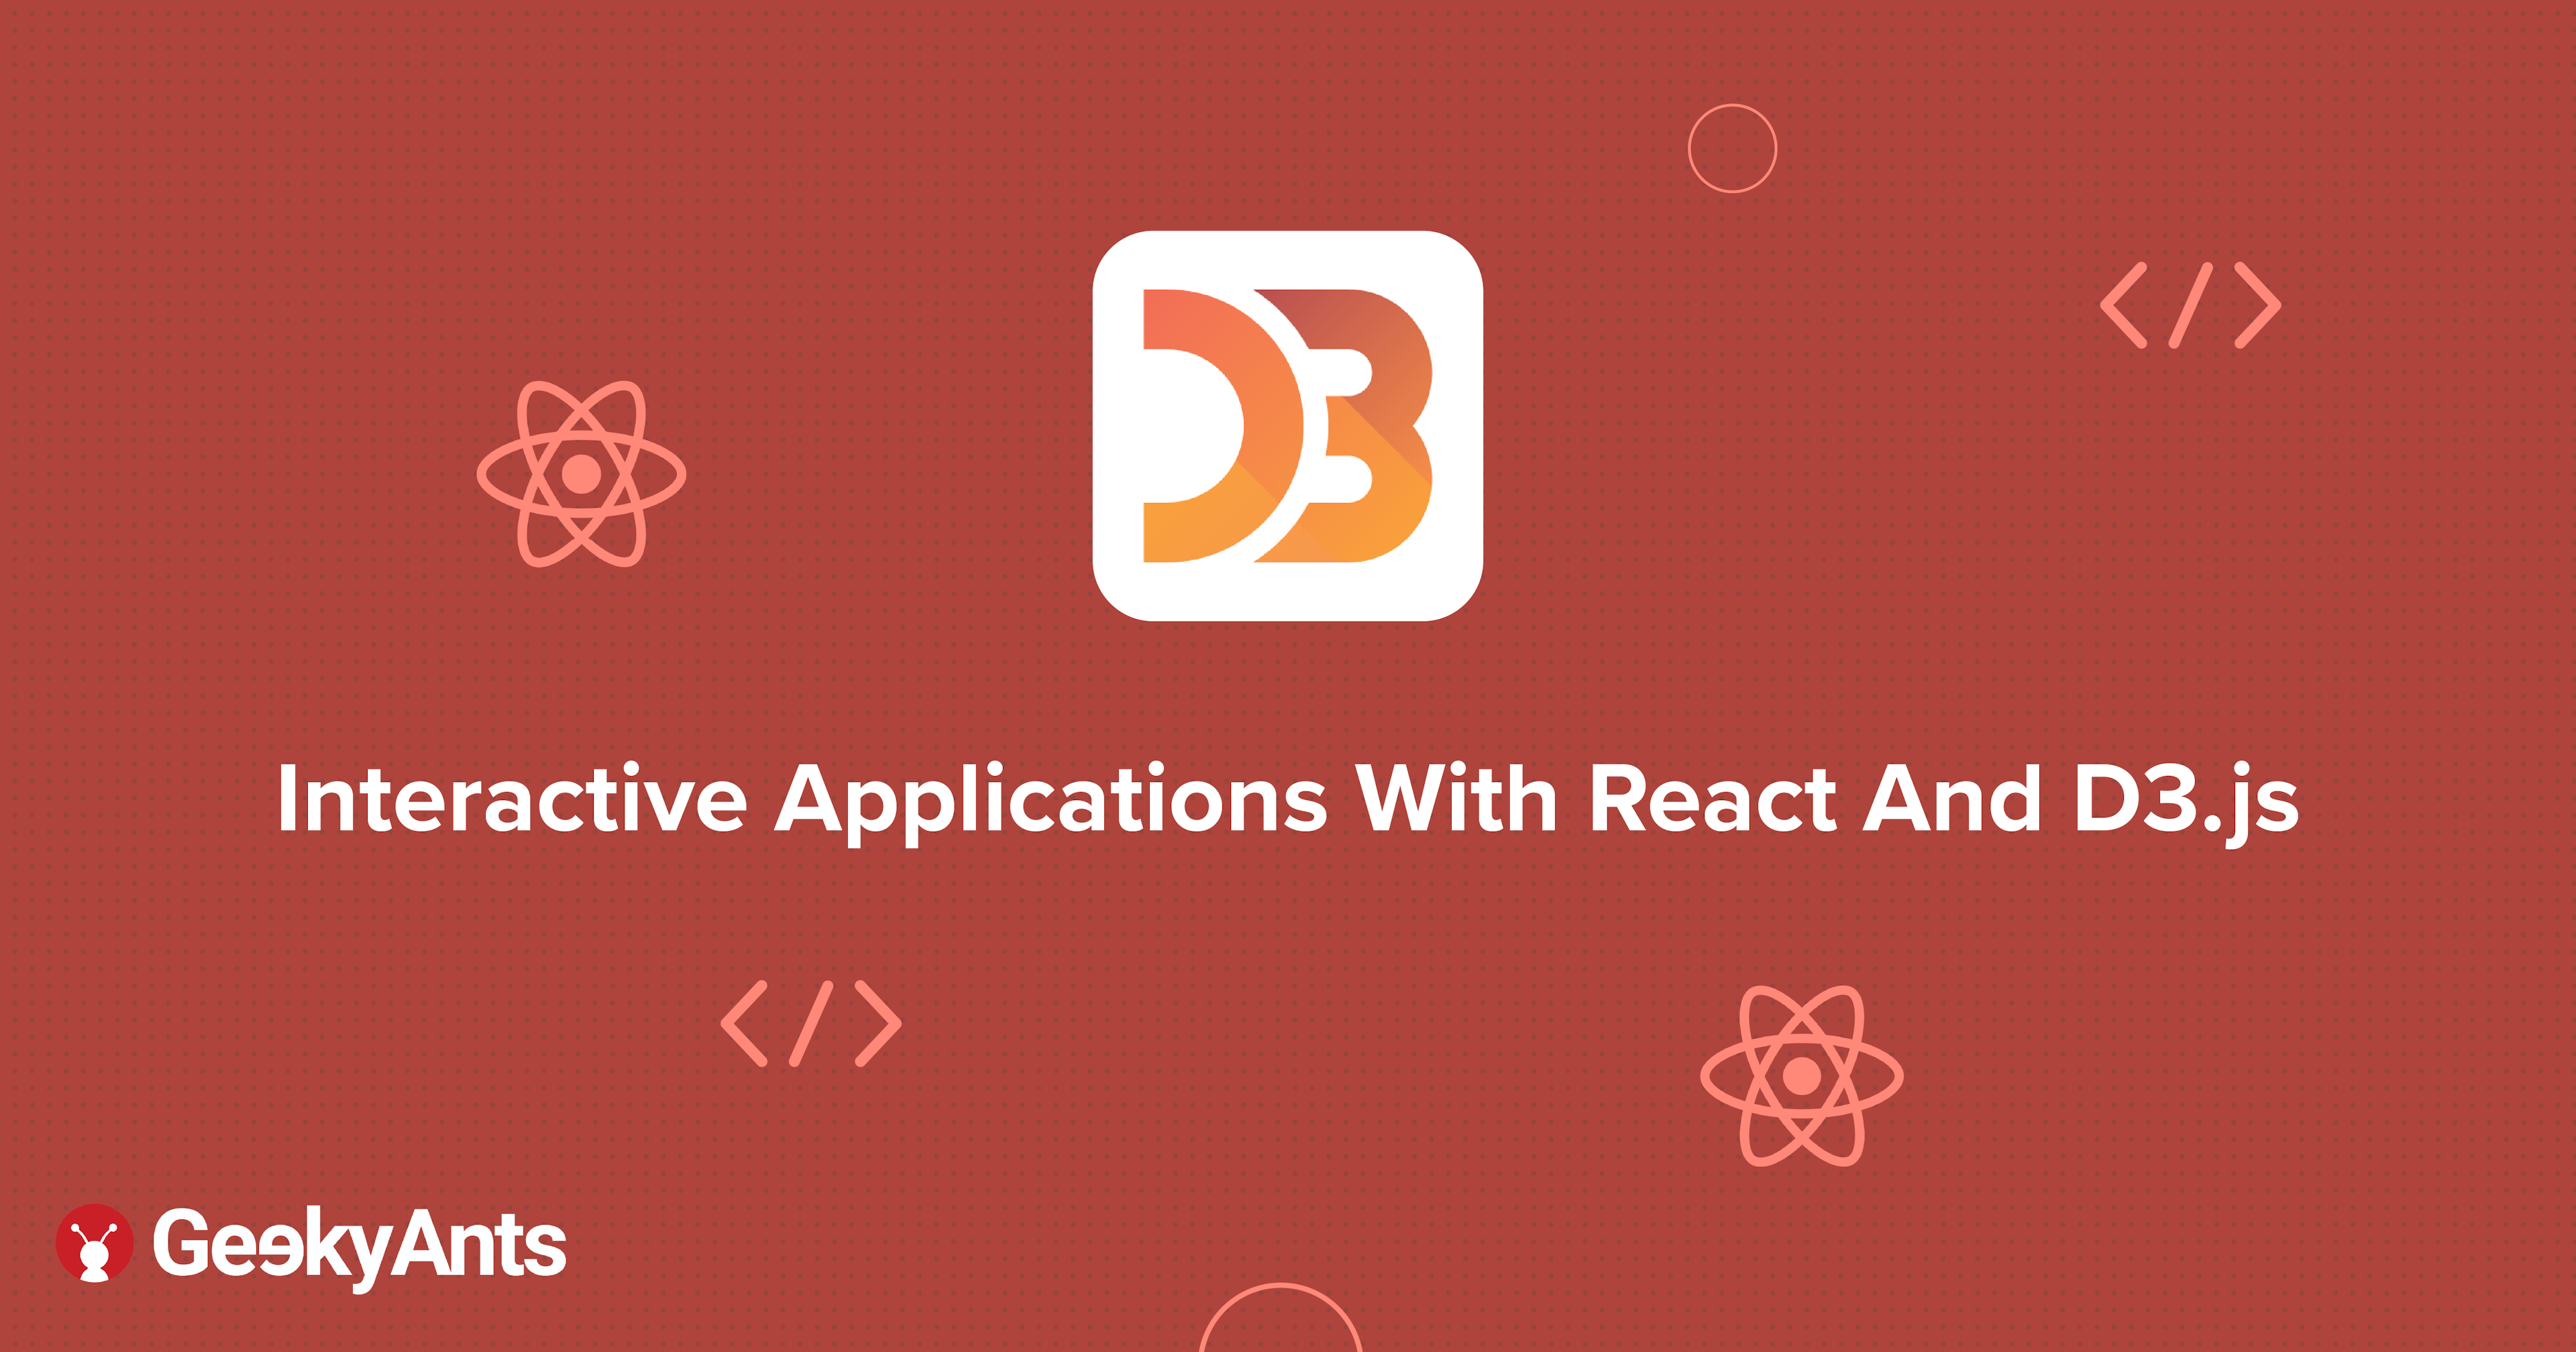 Interactive Applications With React And D3.js